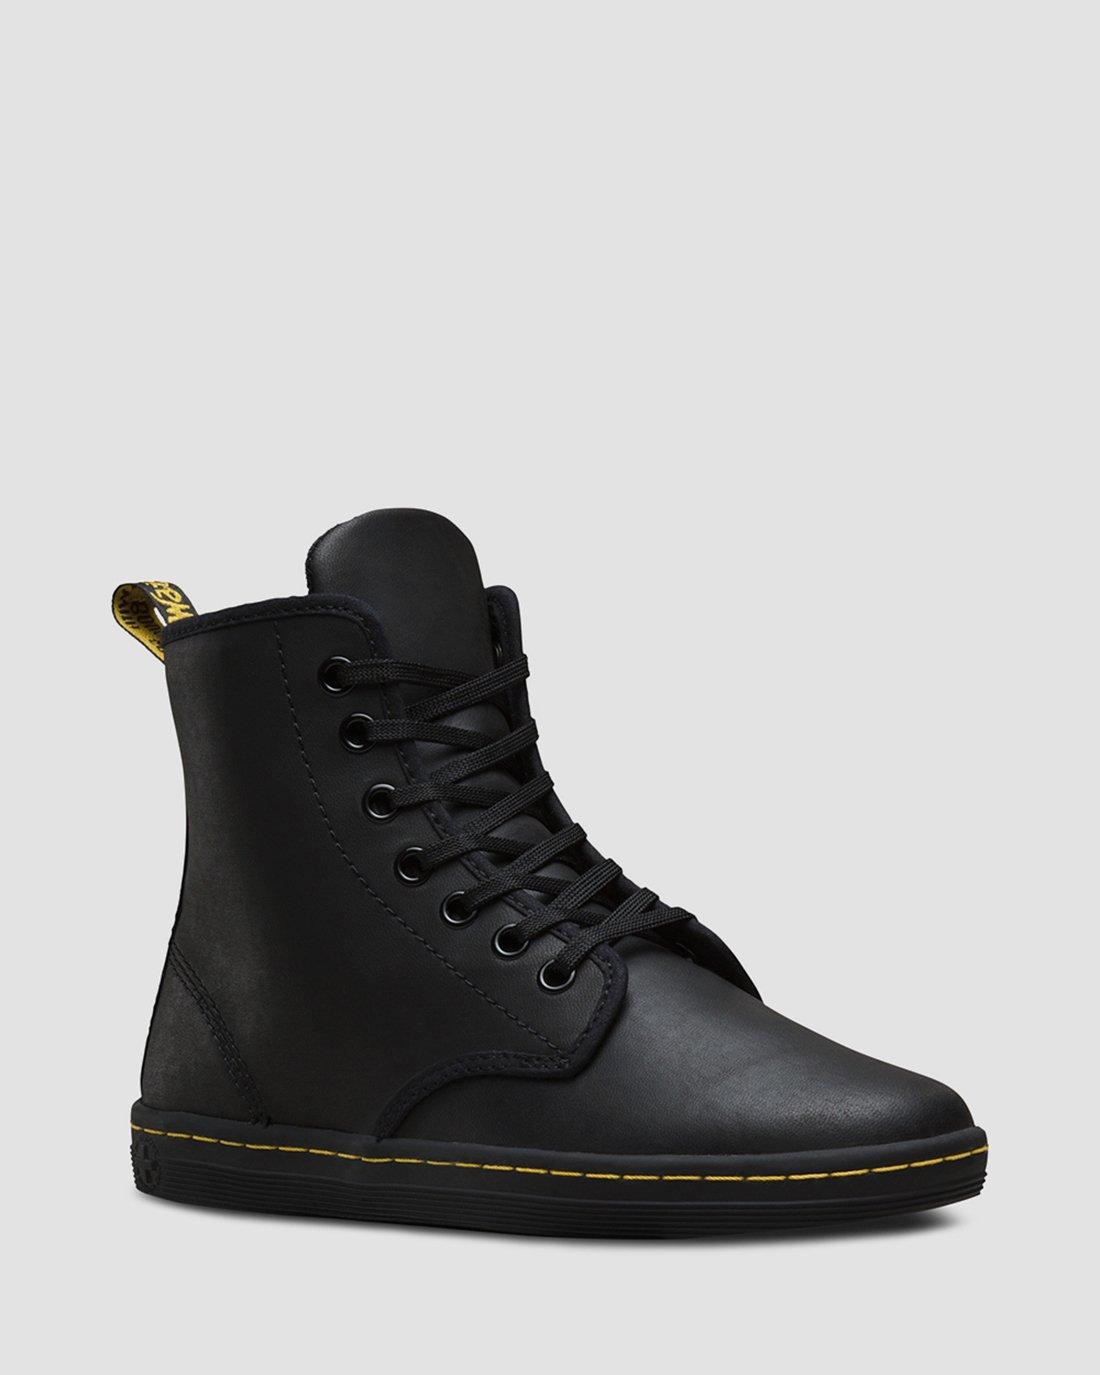 SHOREDITCH GREASY | Dr. Martens Official